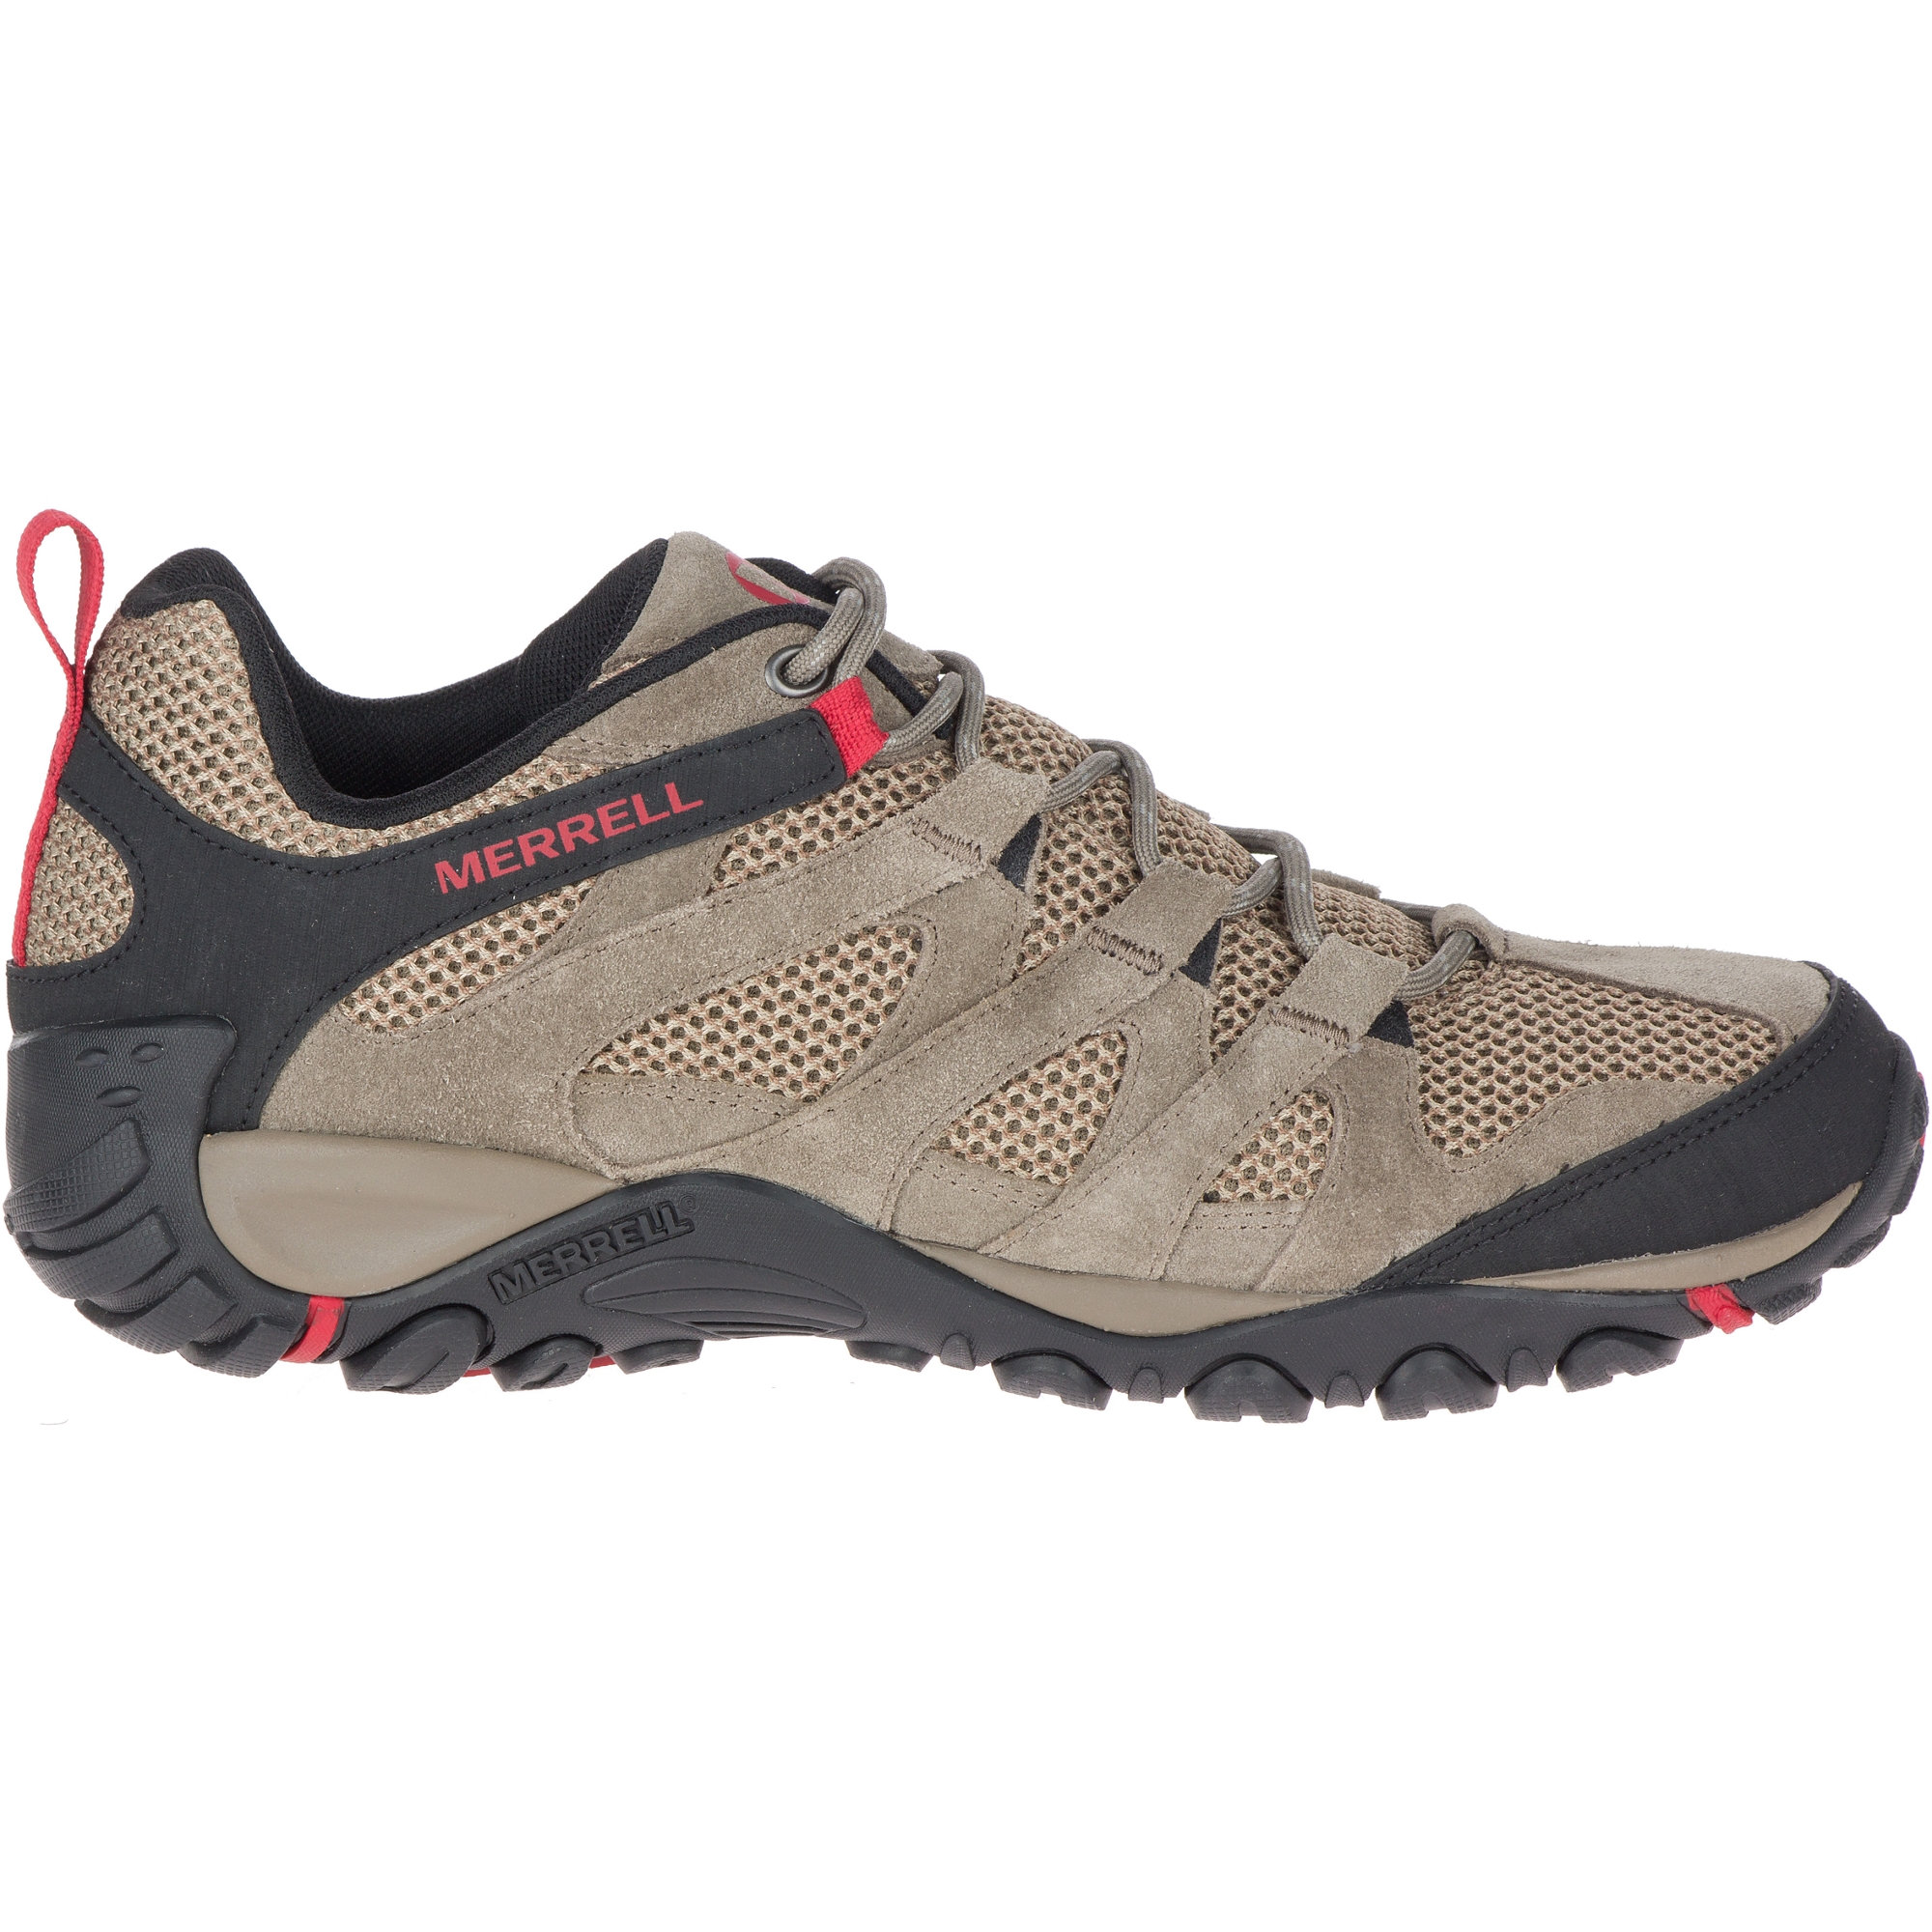 Merrell Men Alverstone Hiking Shoes Suede,Leather-And-Mesh